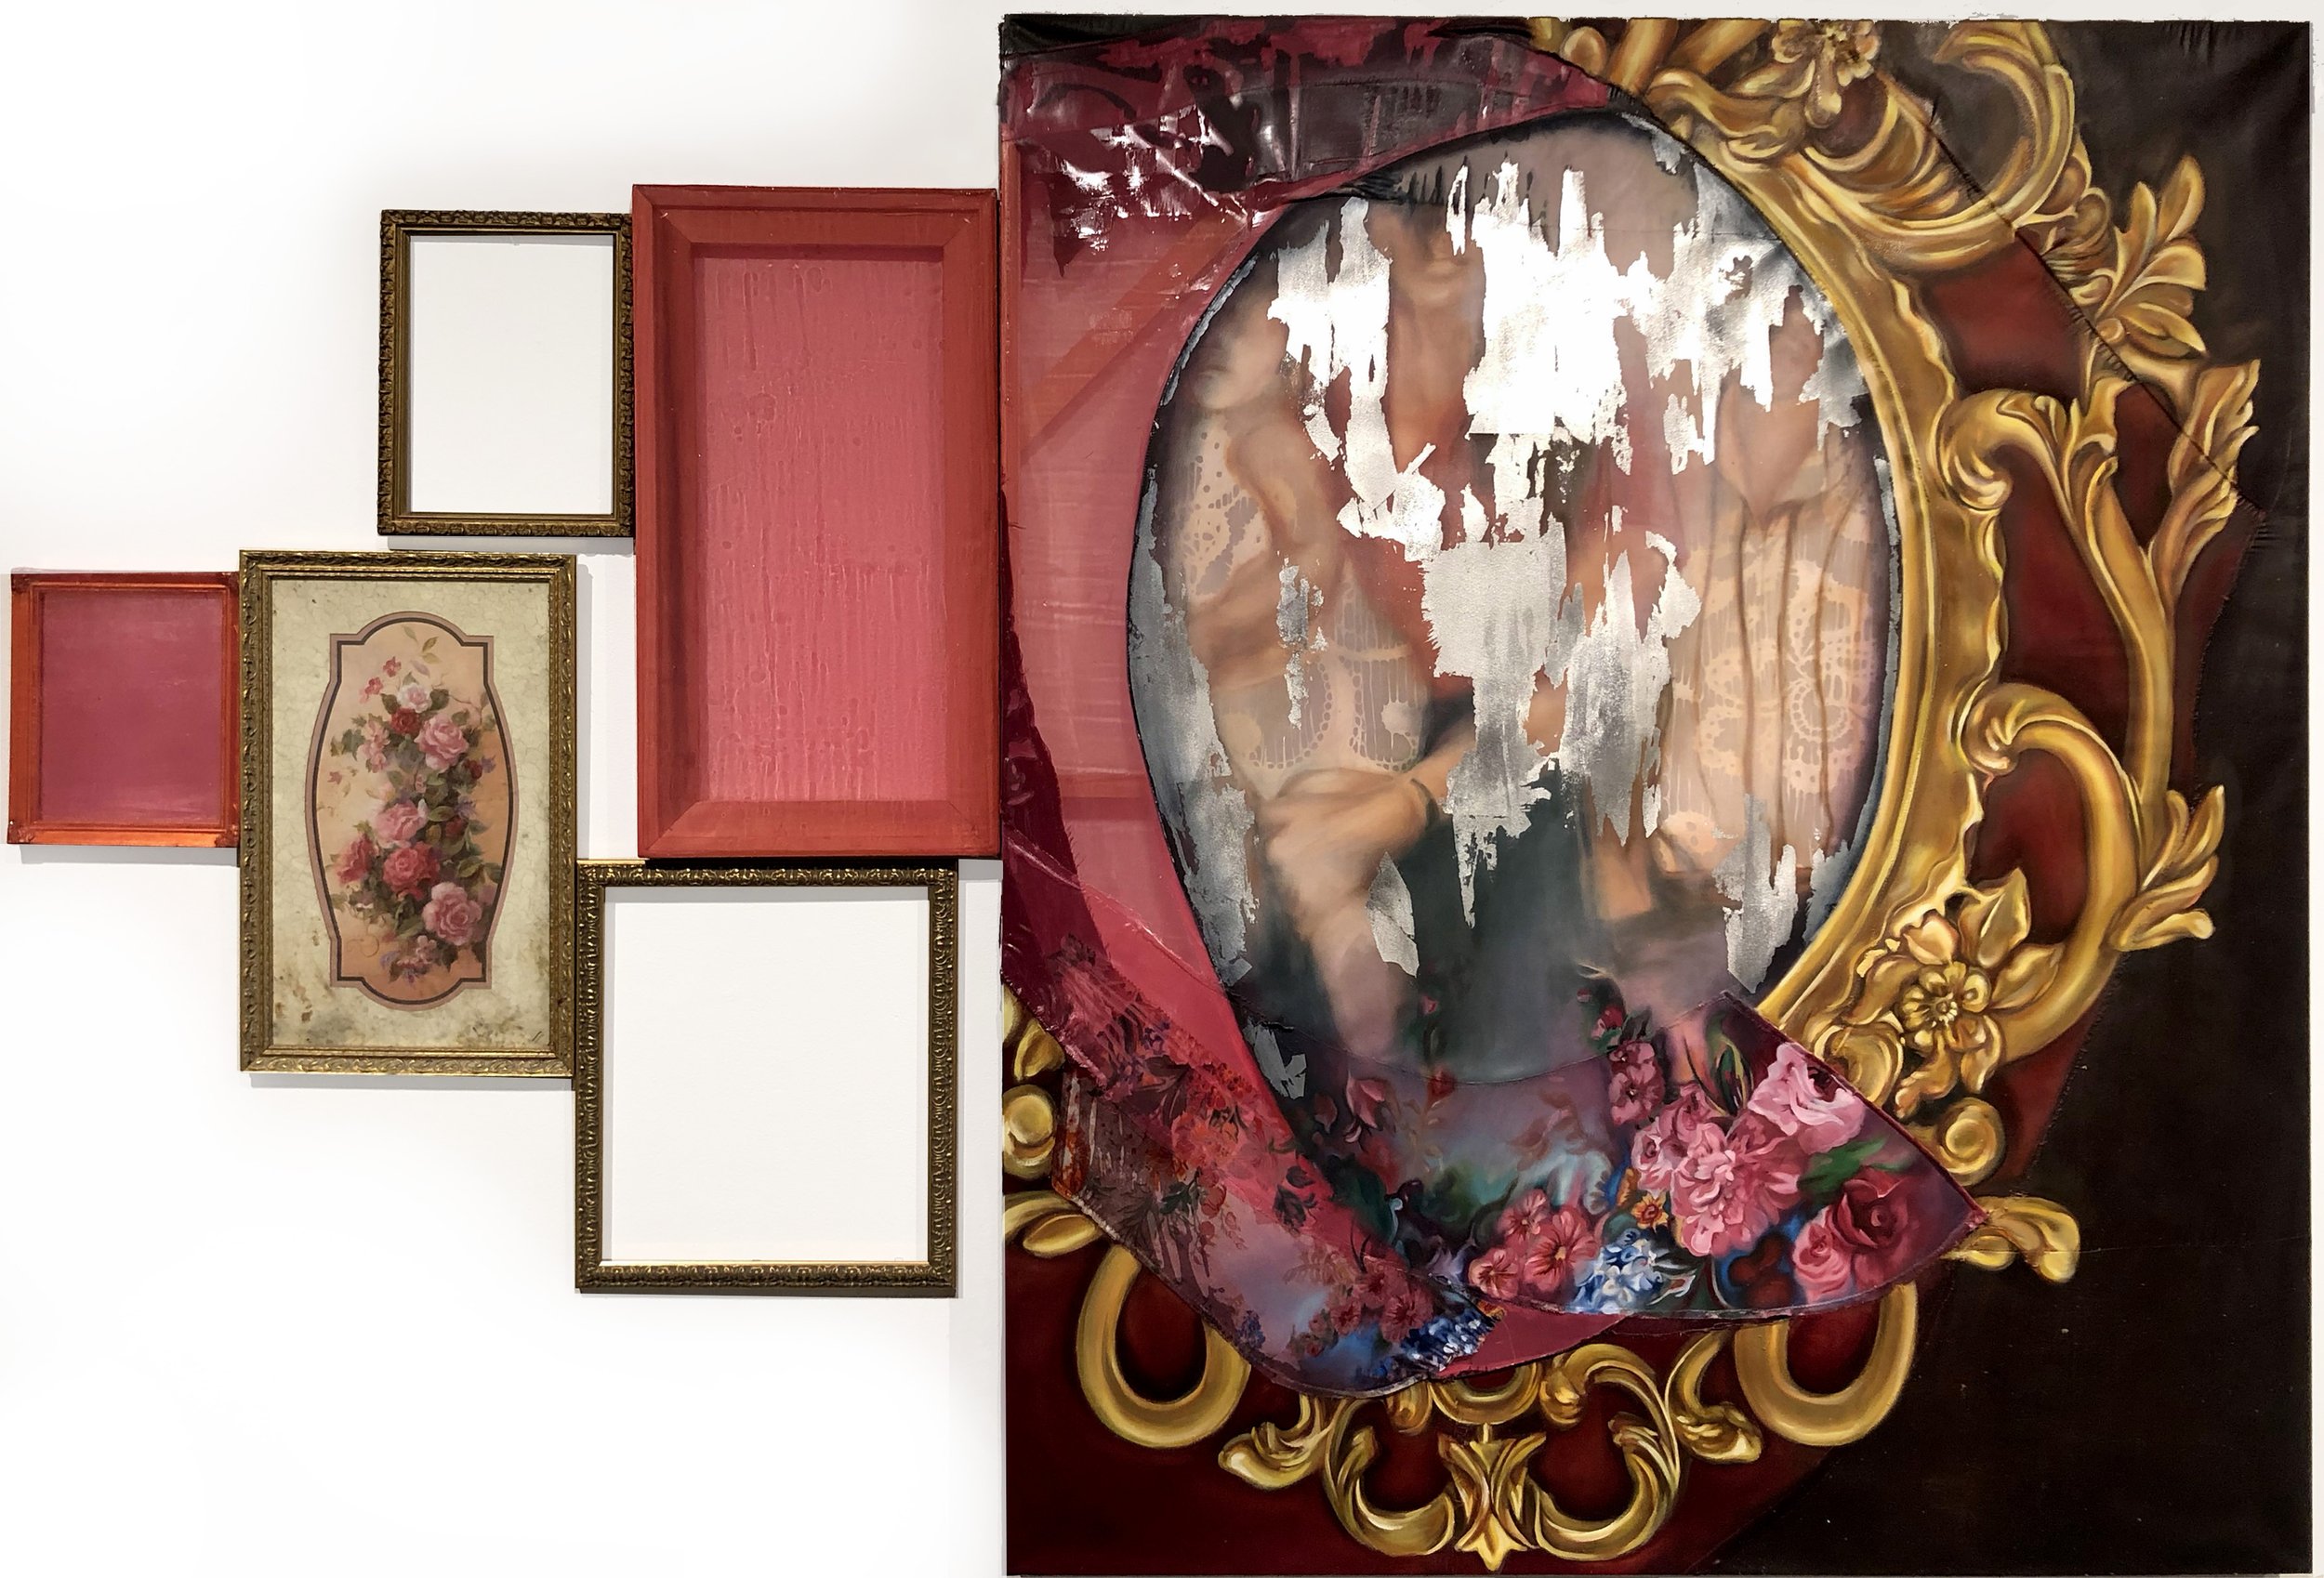 Strangers In Frame_sewn fabric, resin, found frames, silver leaf, oil paint_60x102 inches.jpg